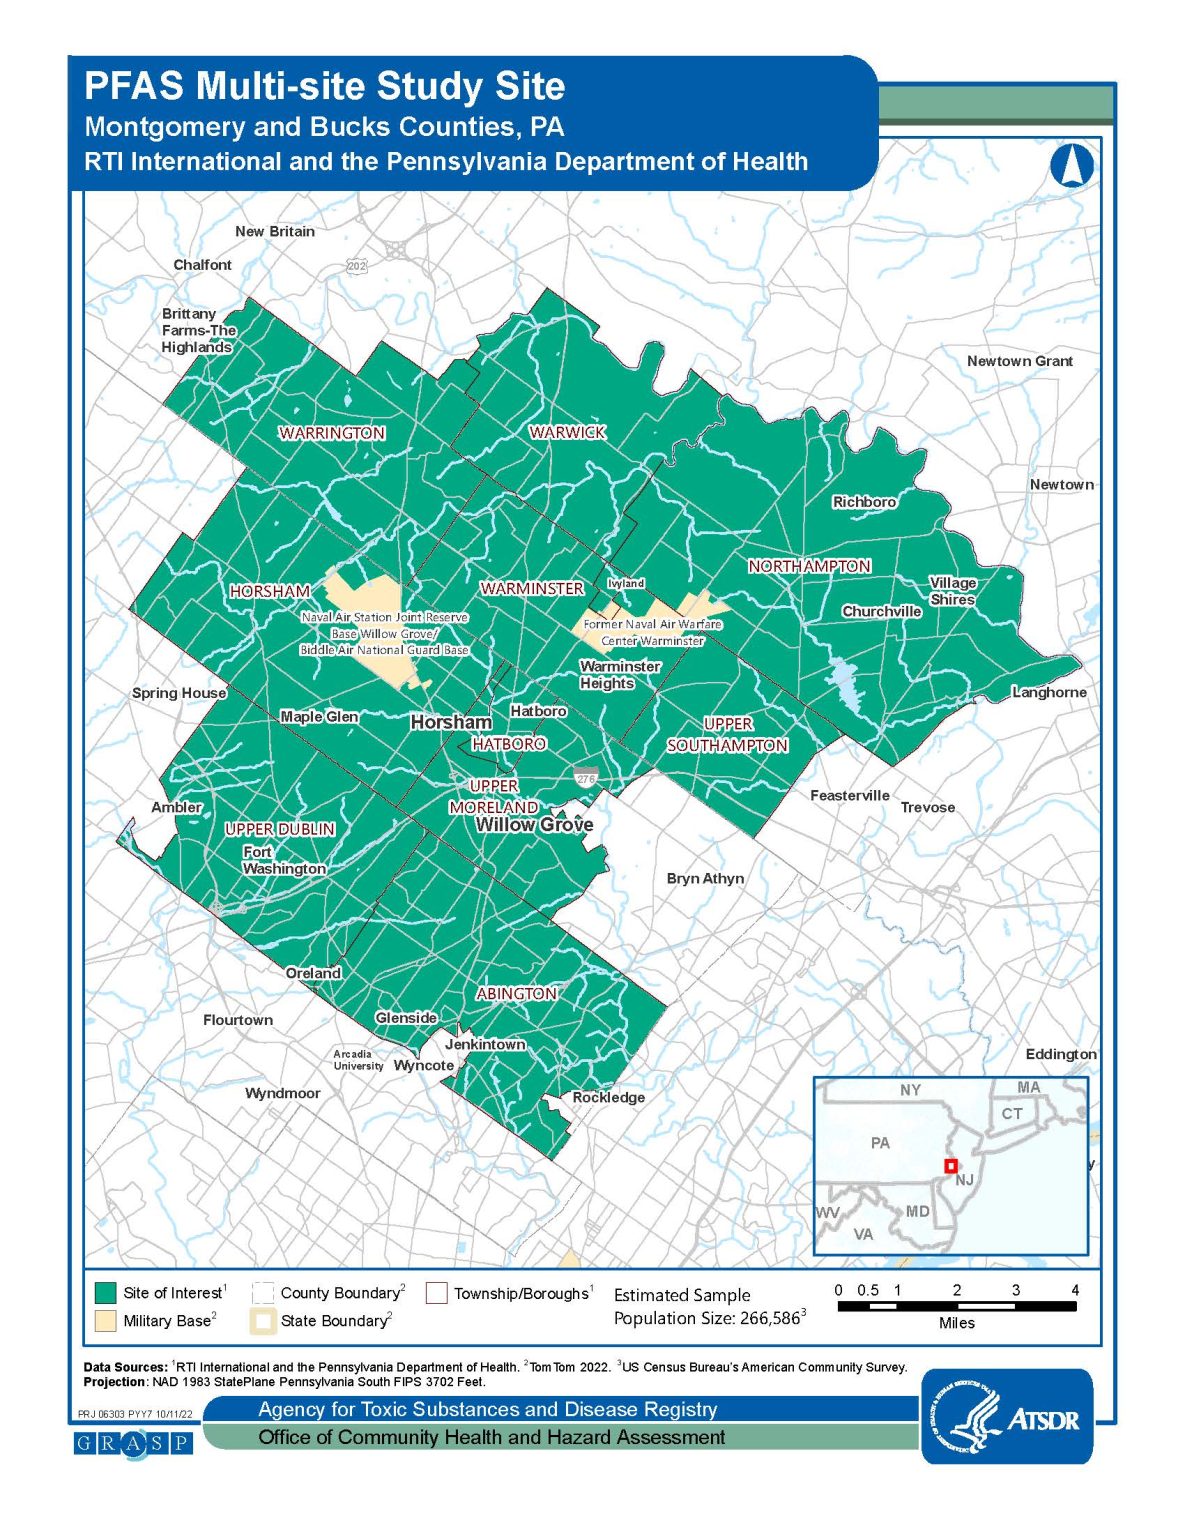 Map of Montgomery & Bucks Counties, PA. The map includes a key and the Estimated Sample Population Size is 266,586.